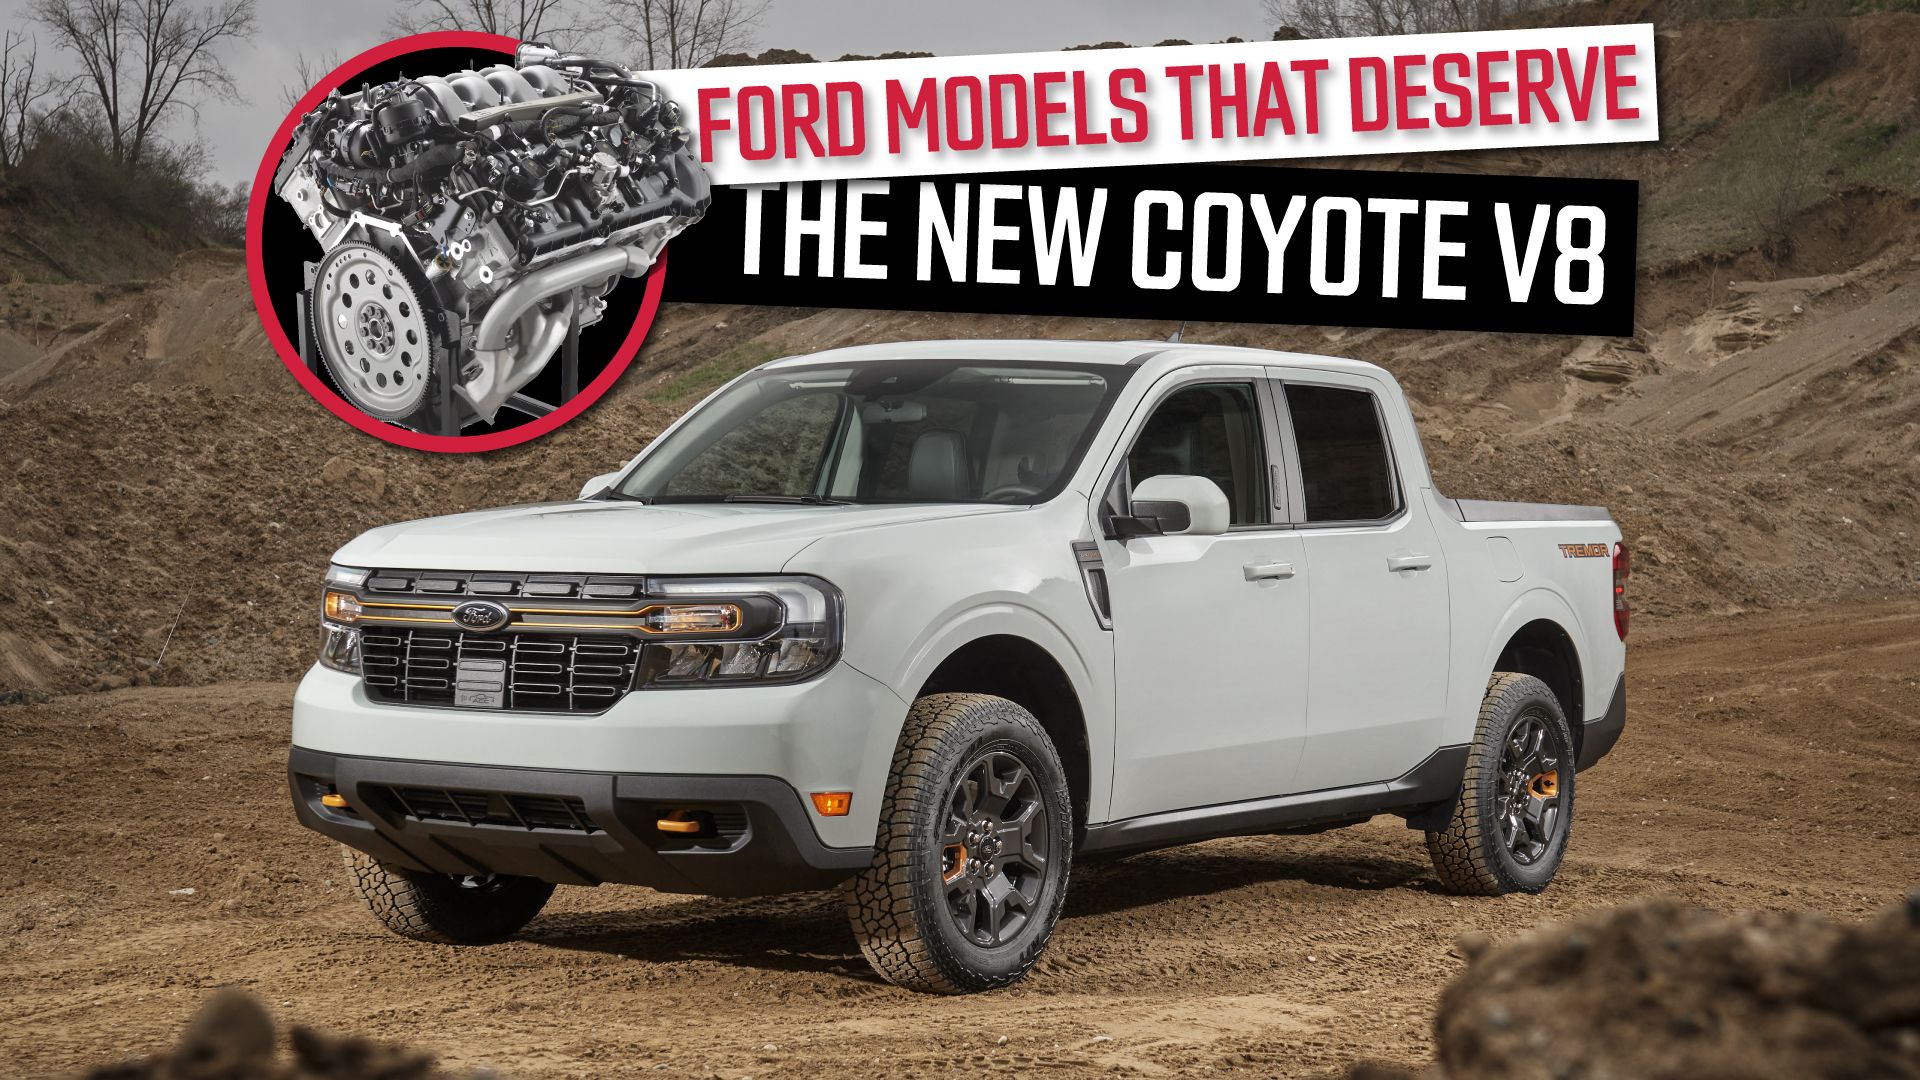 Ford-Models-That-Deserve-The-New-Coyote-V8